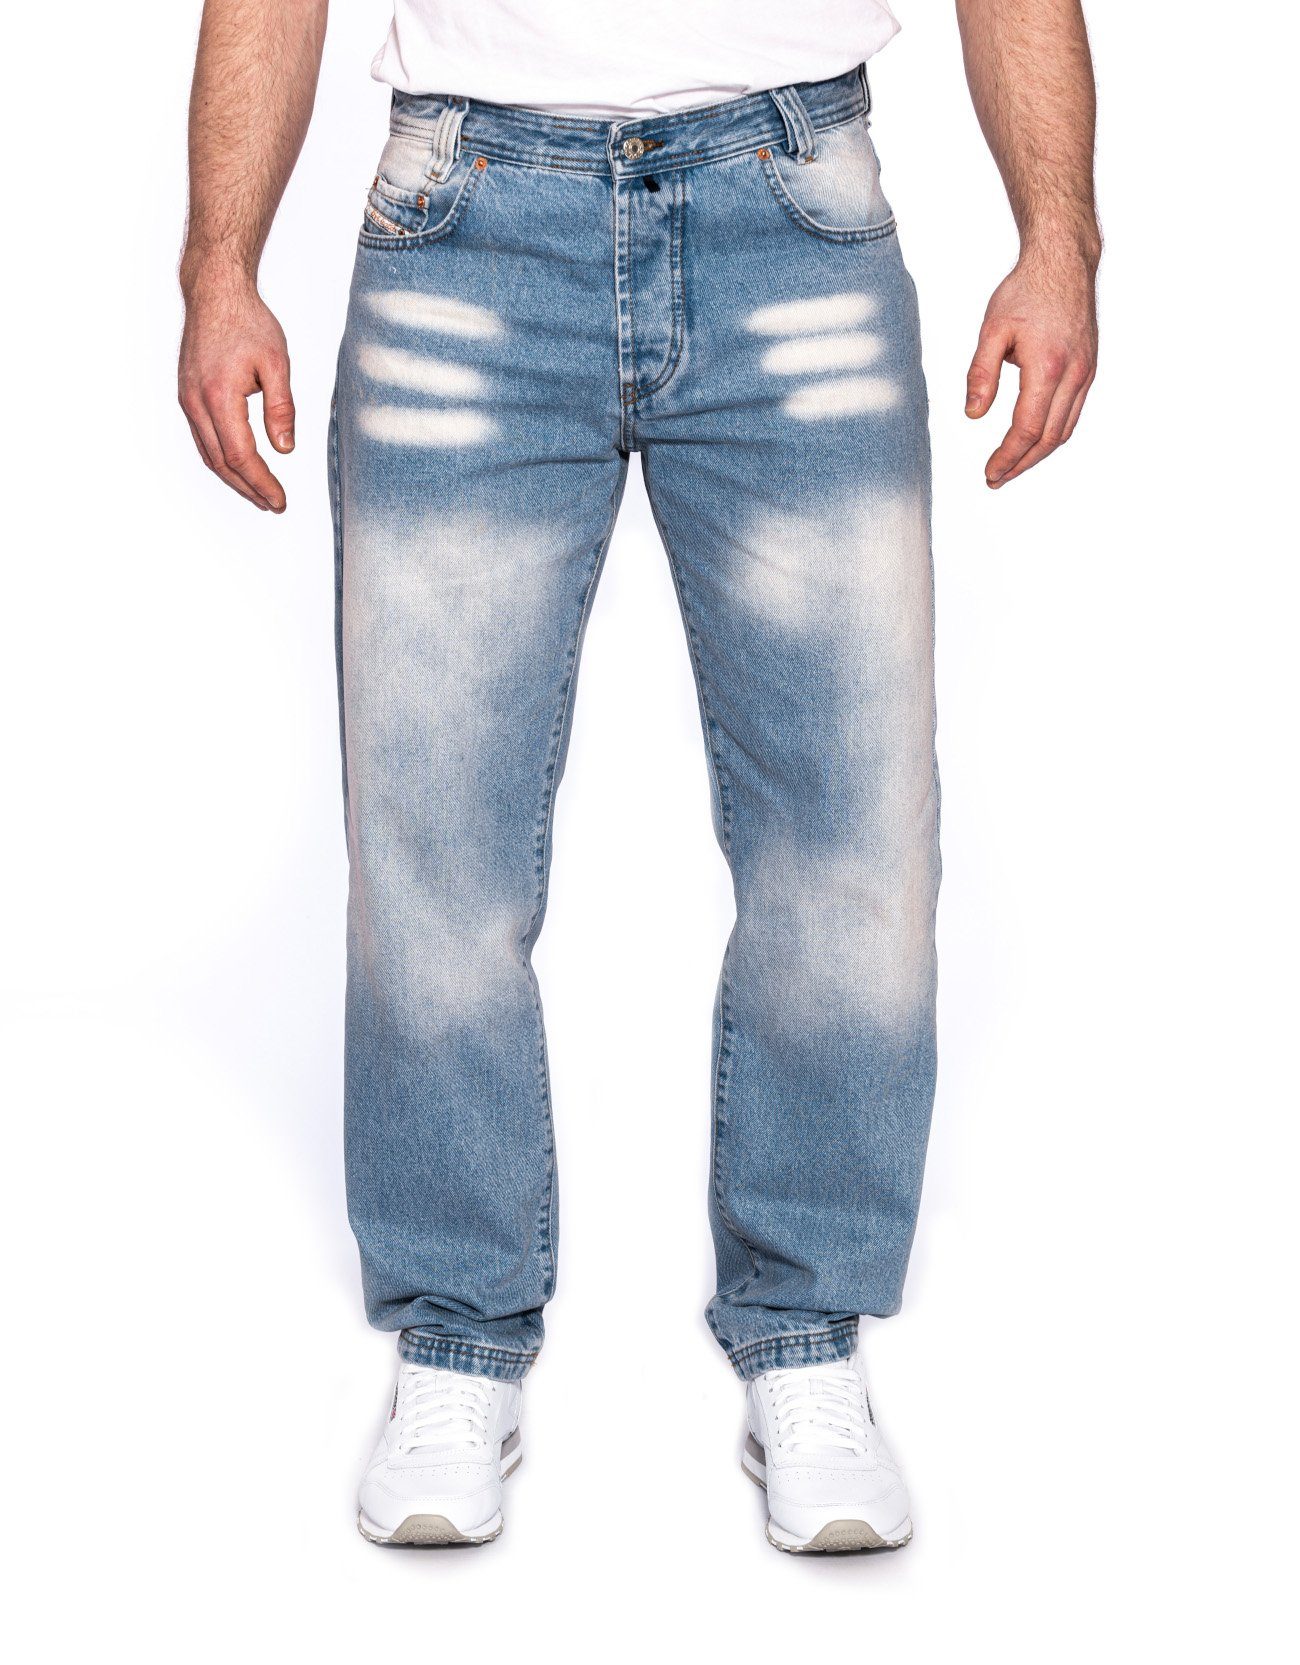 PICALDI Jeans Weite Loose Fit Relaxed Zicco Chemie Jeans 1 472 Fit